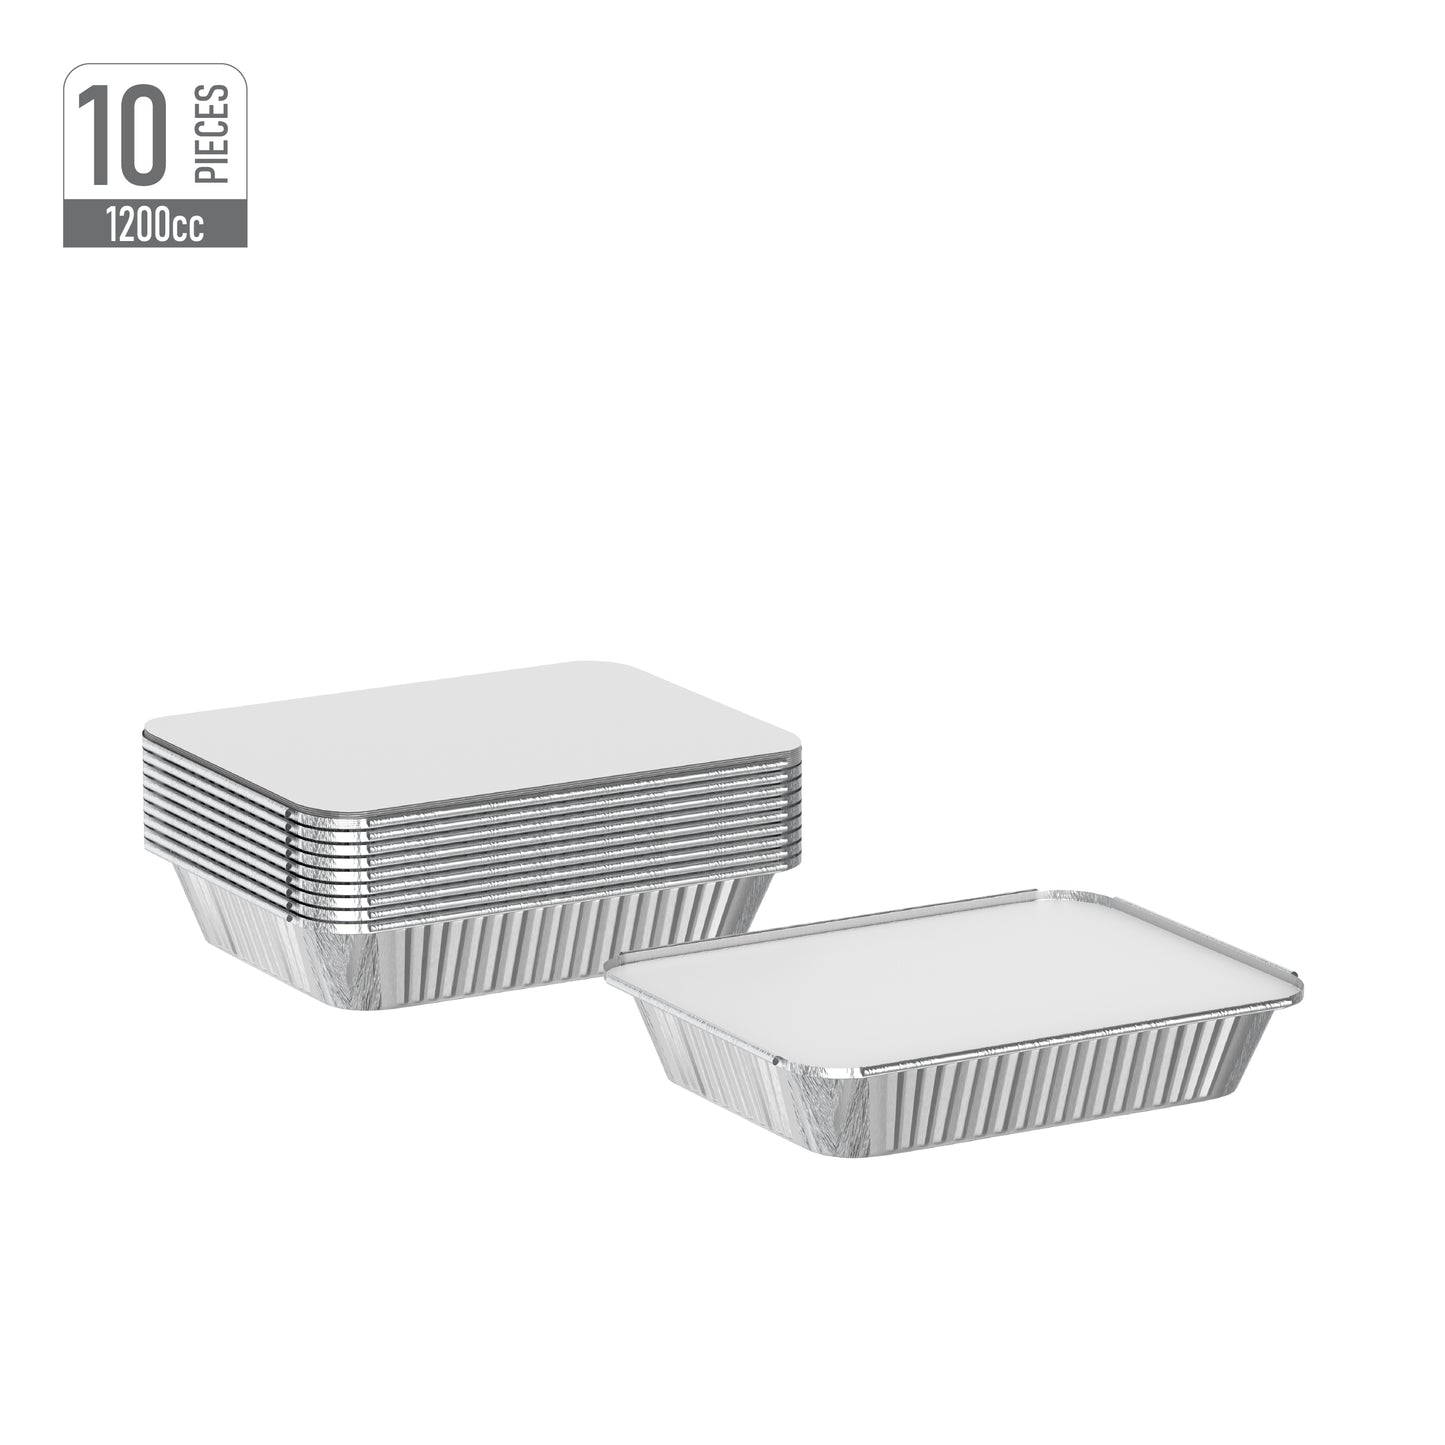 1200 cc Pack of 10 Aluminium Containers with Lids